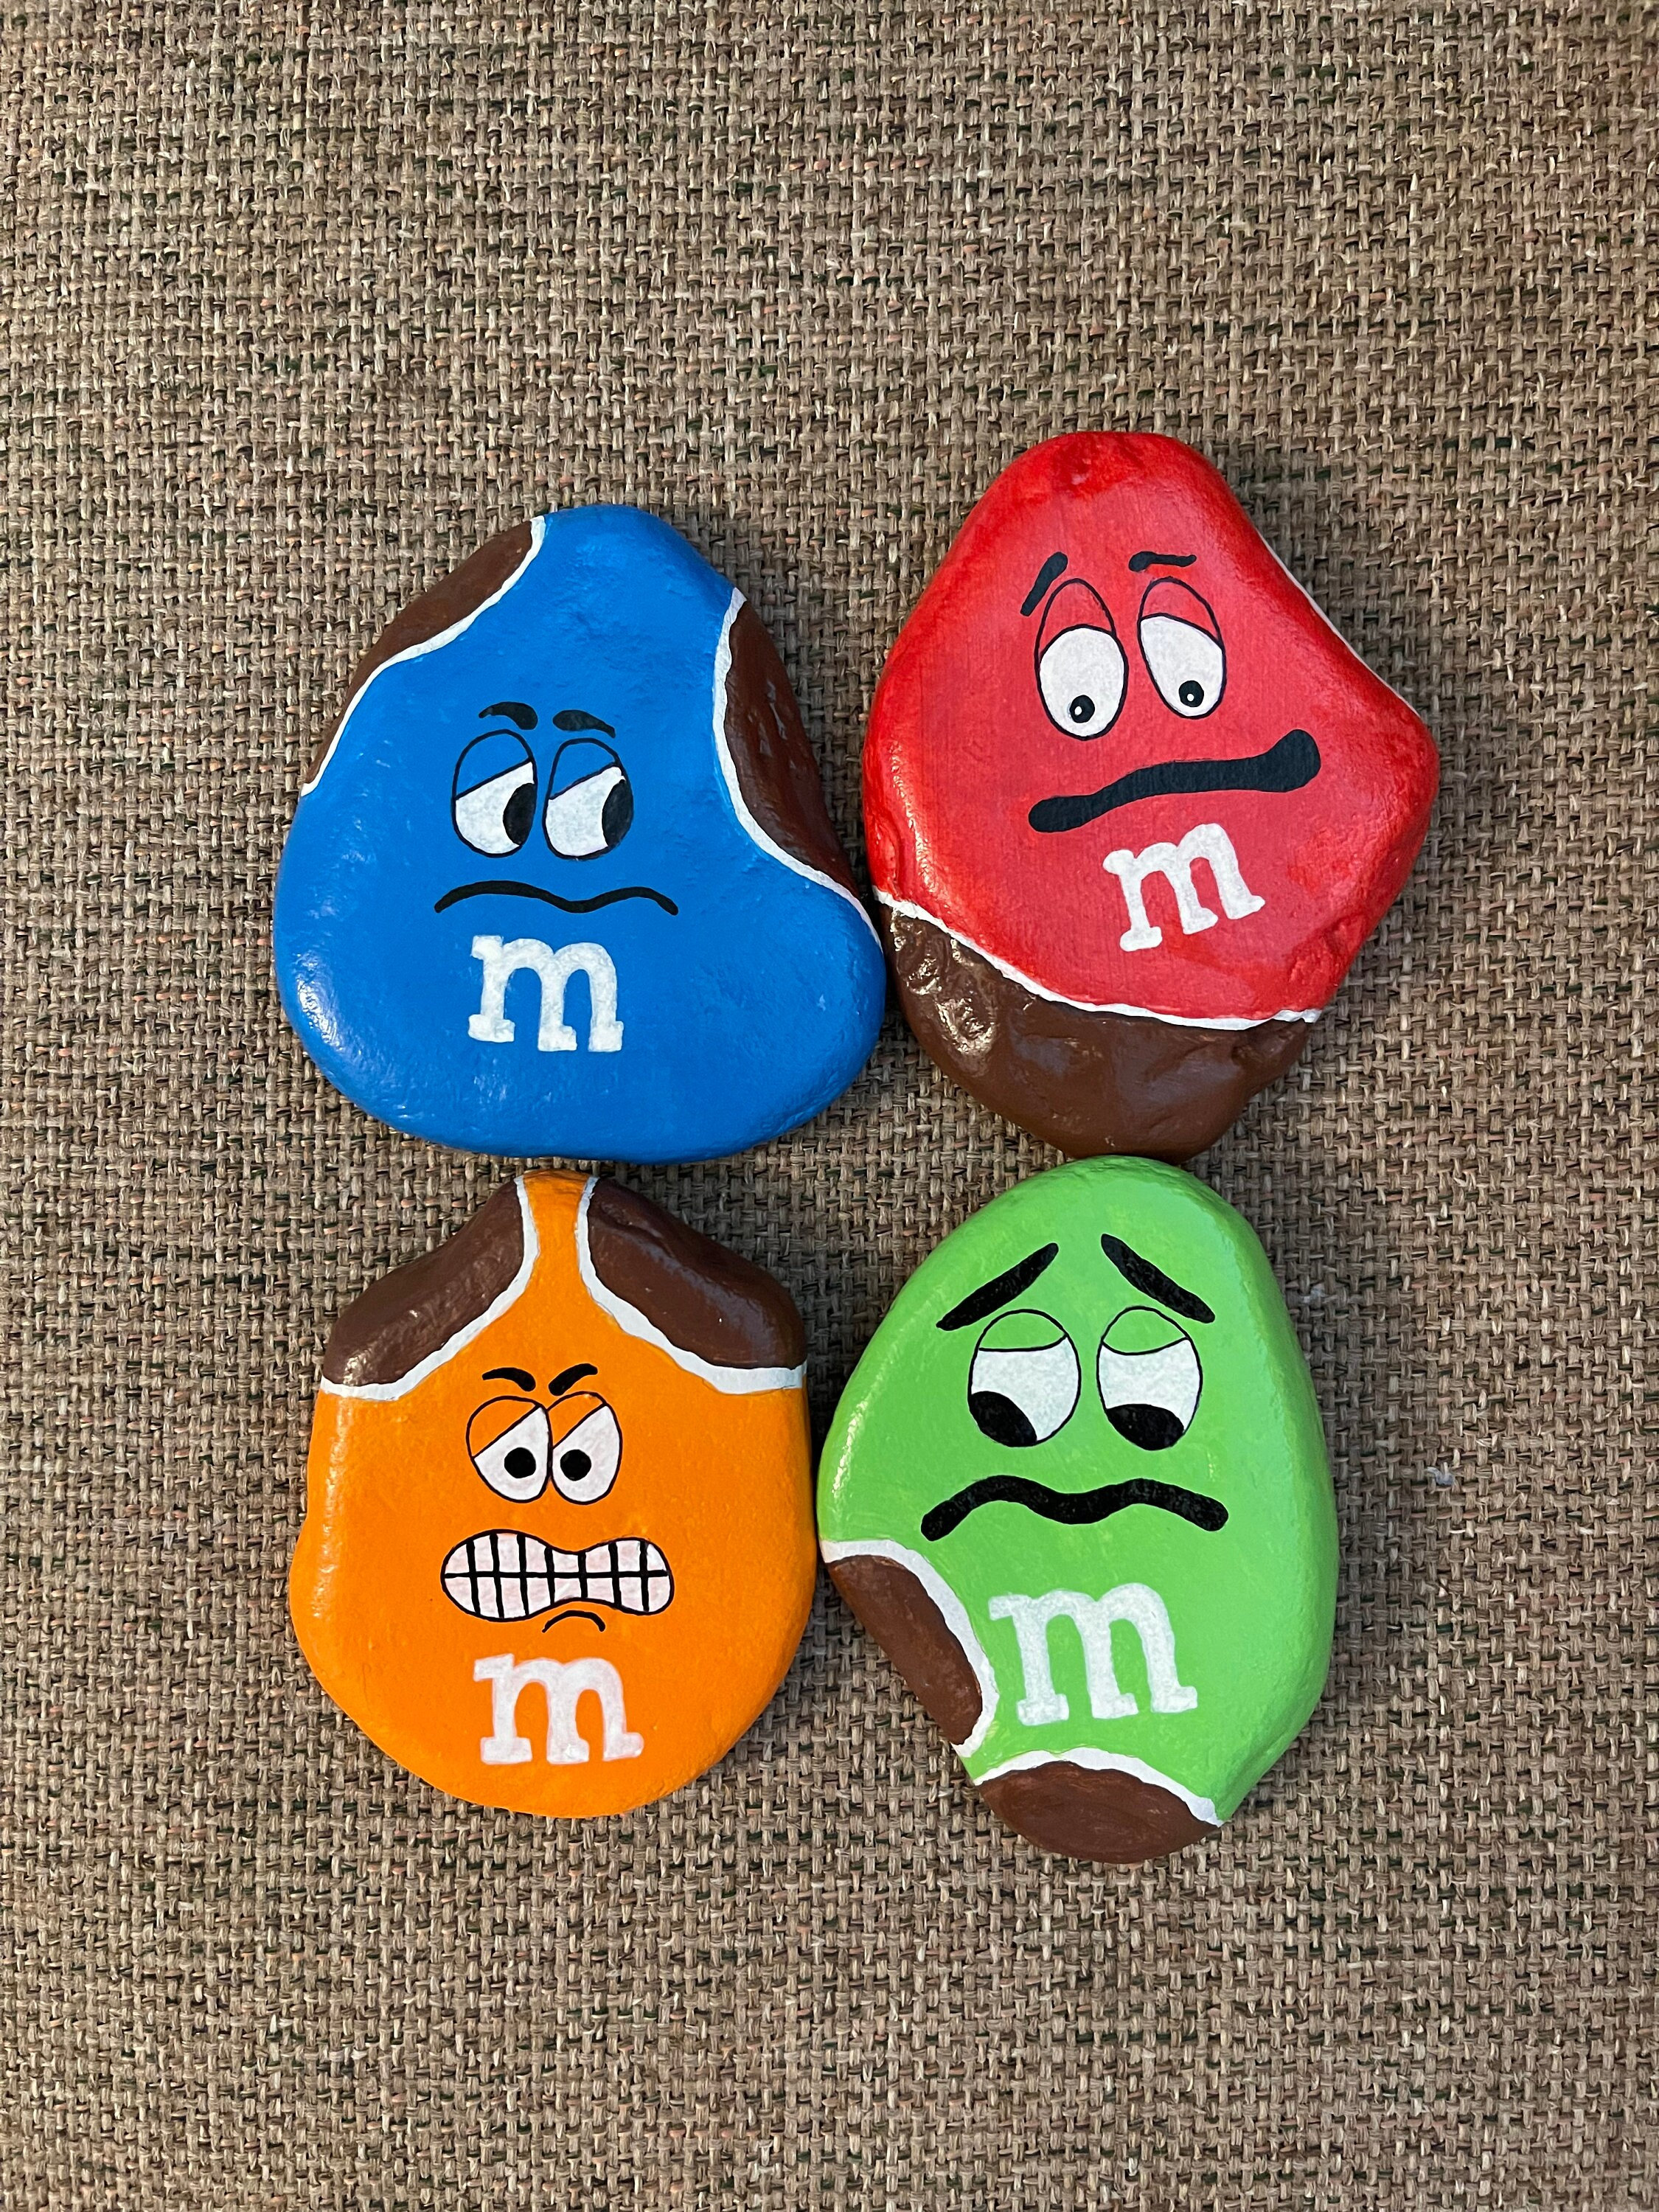 Giant Peanut M&M Candy Painted Rocks 